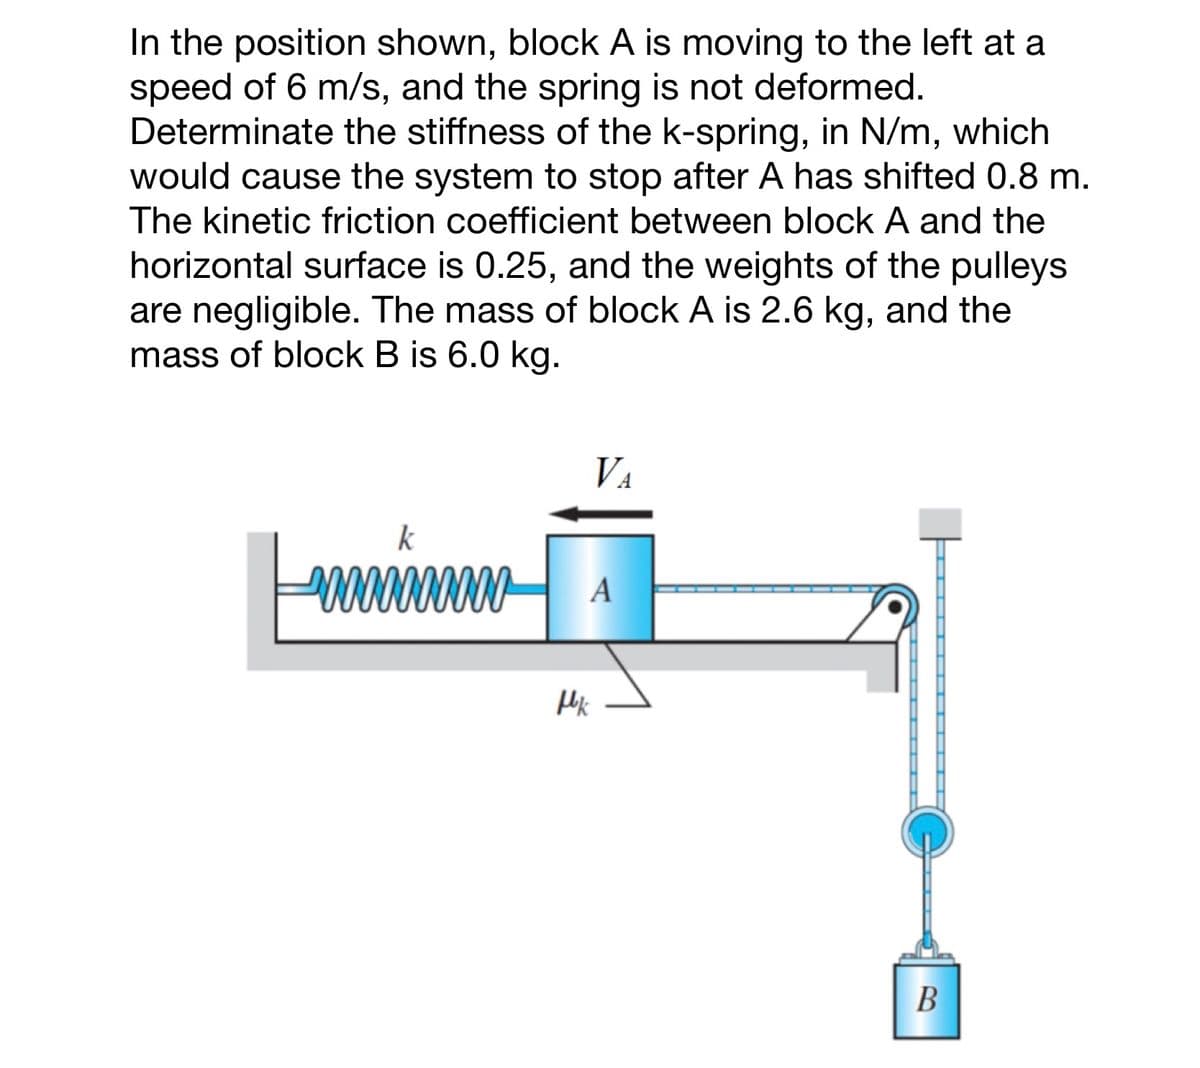 In the position shown, block A is moving to the left at a
speed of 6 m/s, and the spring is not deformed.
Determinate the stiffness of the k-spring, in N/m, which
would cause the system to stop after A has shifted 0.8 m.
The kinetic friction coefficient between block A and the
horizontal surface is 0.25, and the weights of the pulleys
are negligible. The mass of block A is 2.6 kg, and the
mass of block B is 6.0 kg.
VA
k
0000000000 A
fk
B